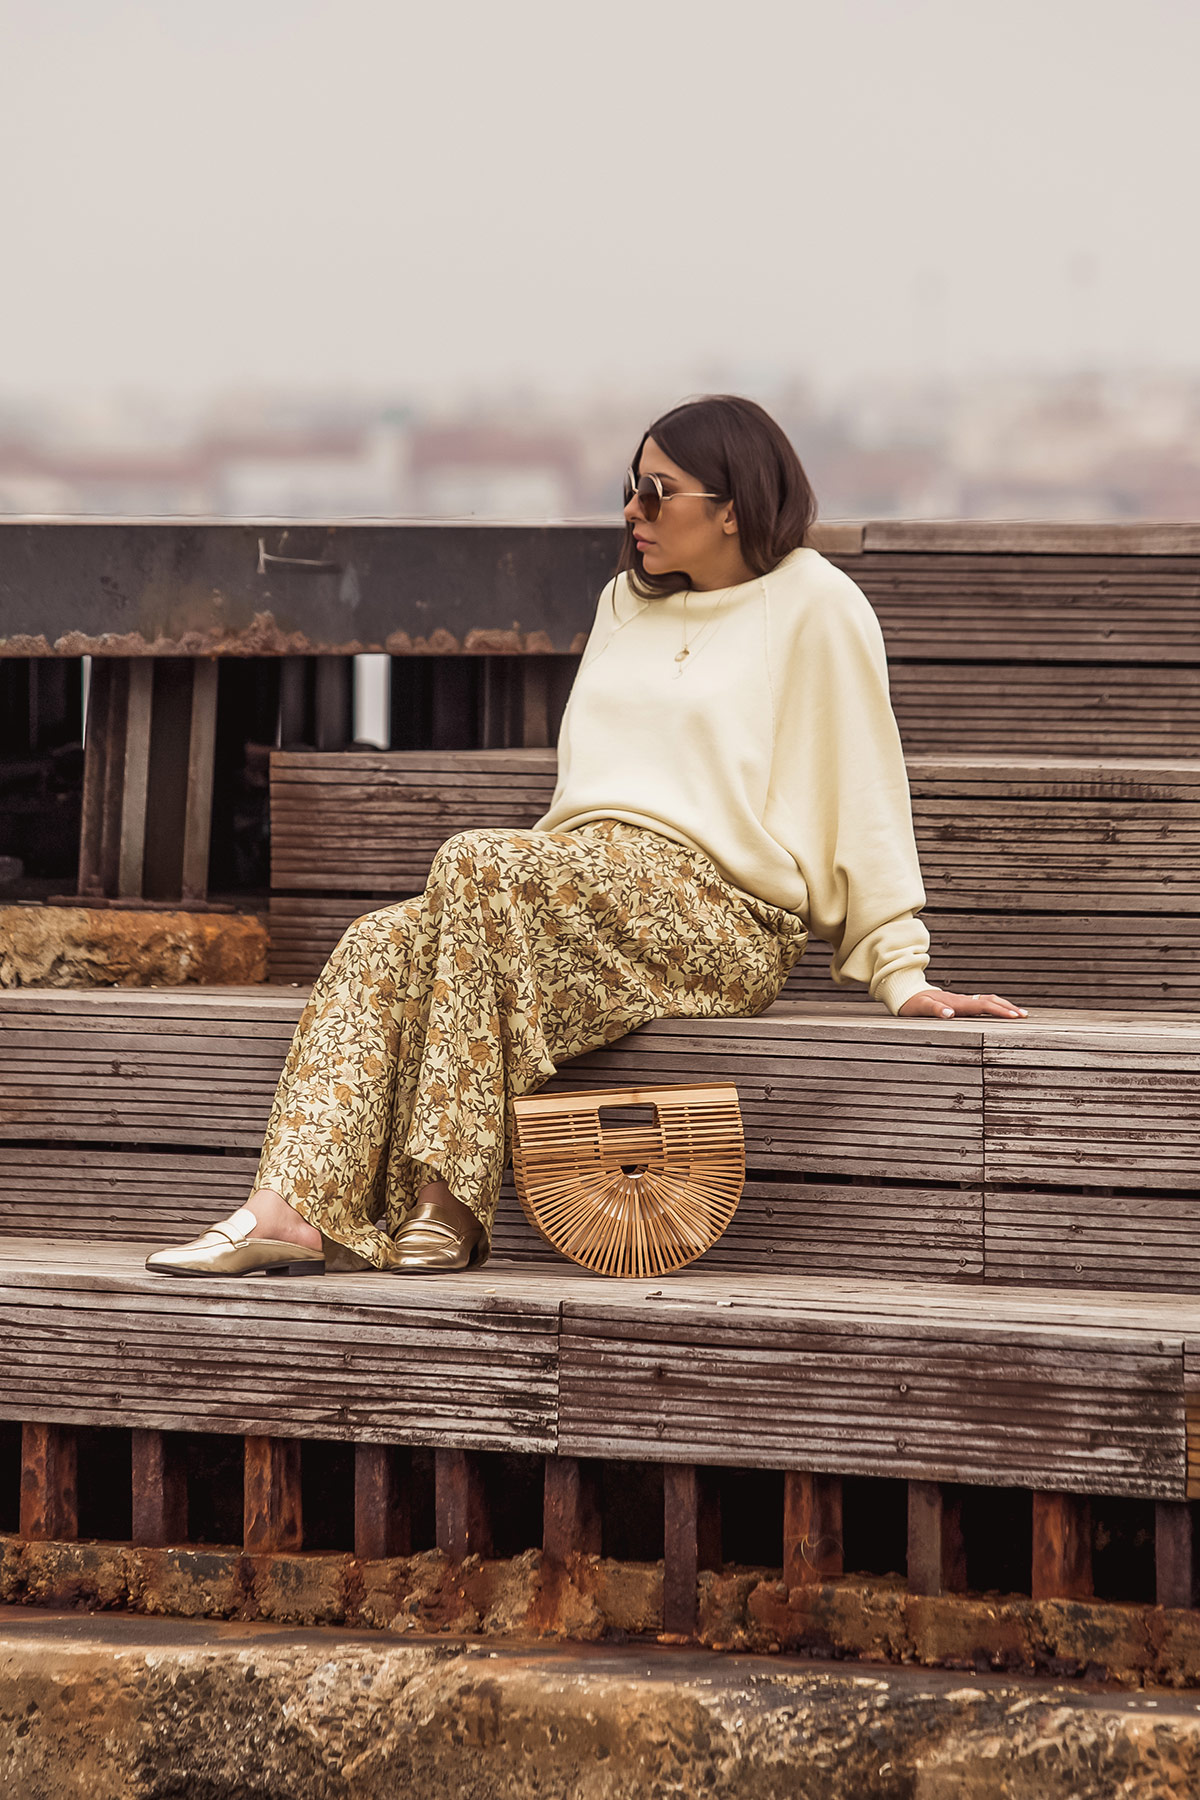 yellow trend Spring Summer 2018 - yellow outfit by Stella Asteria - Fashion & Style Blogger wearing yellow floral pants, yellow sweatshirt, Cult Gaia bag, and Chloé sunglasses